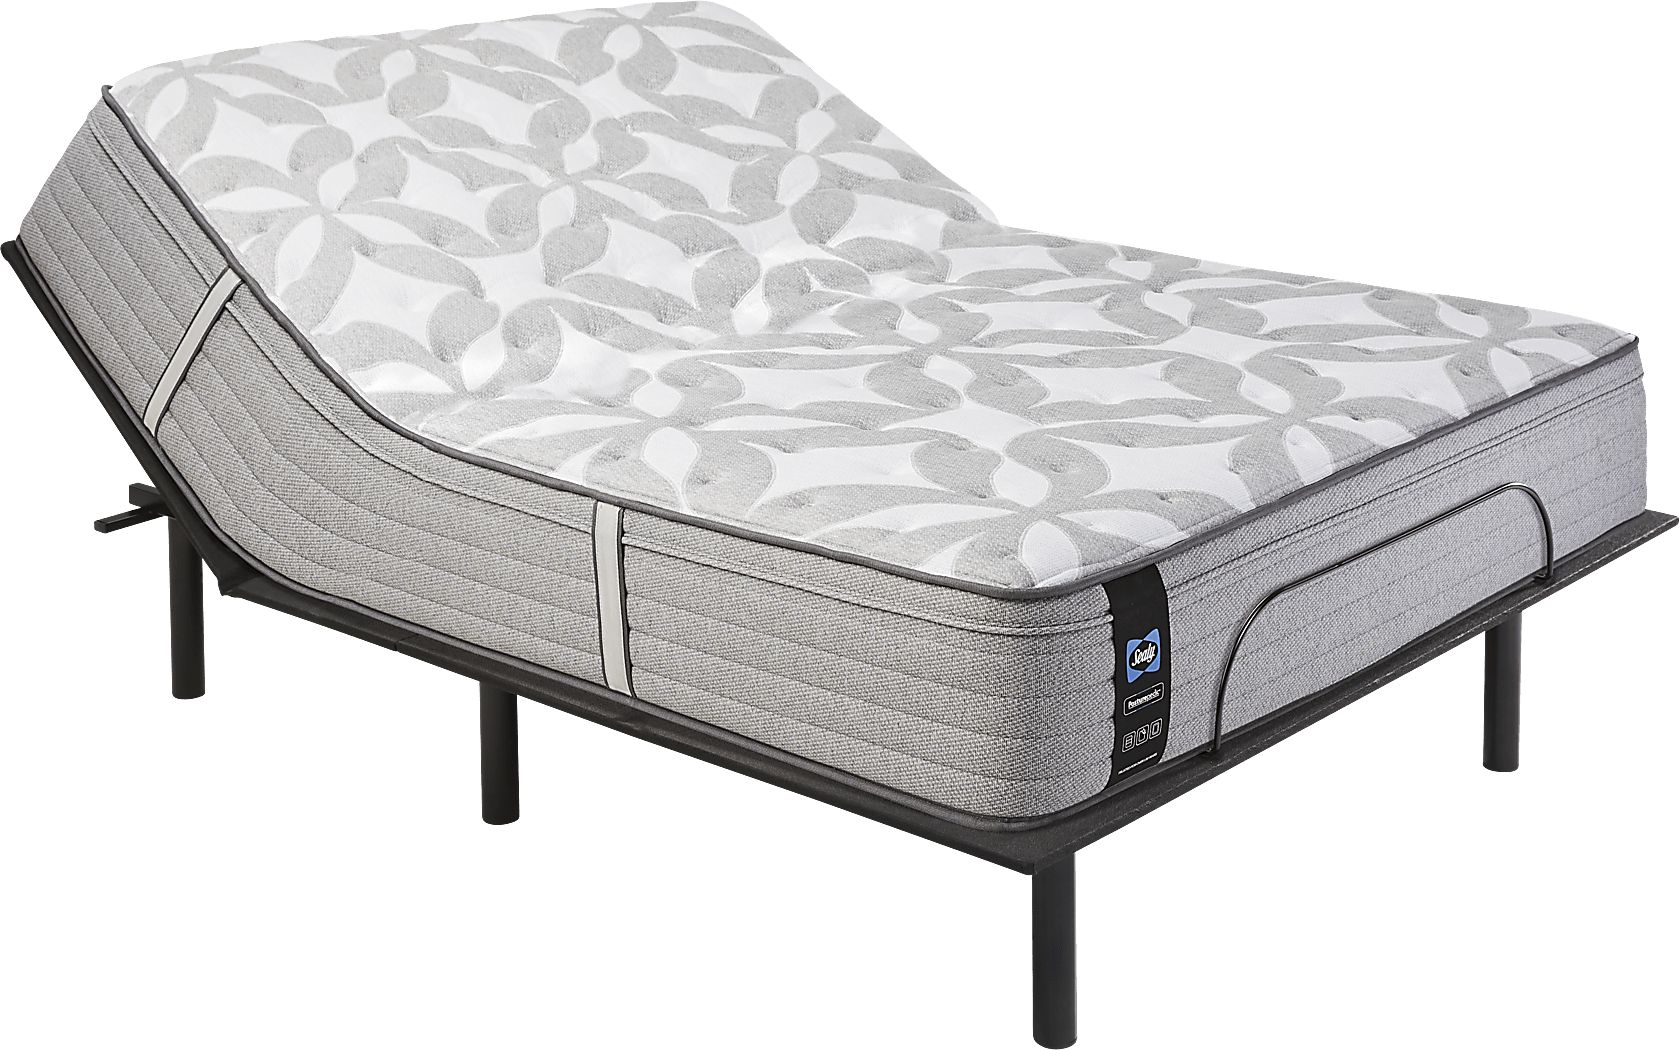 sealy posturepedic cooling comfort mattress protector review